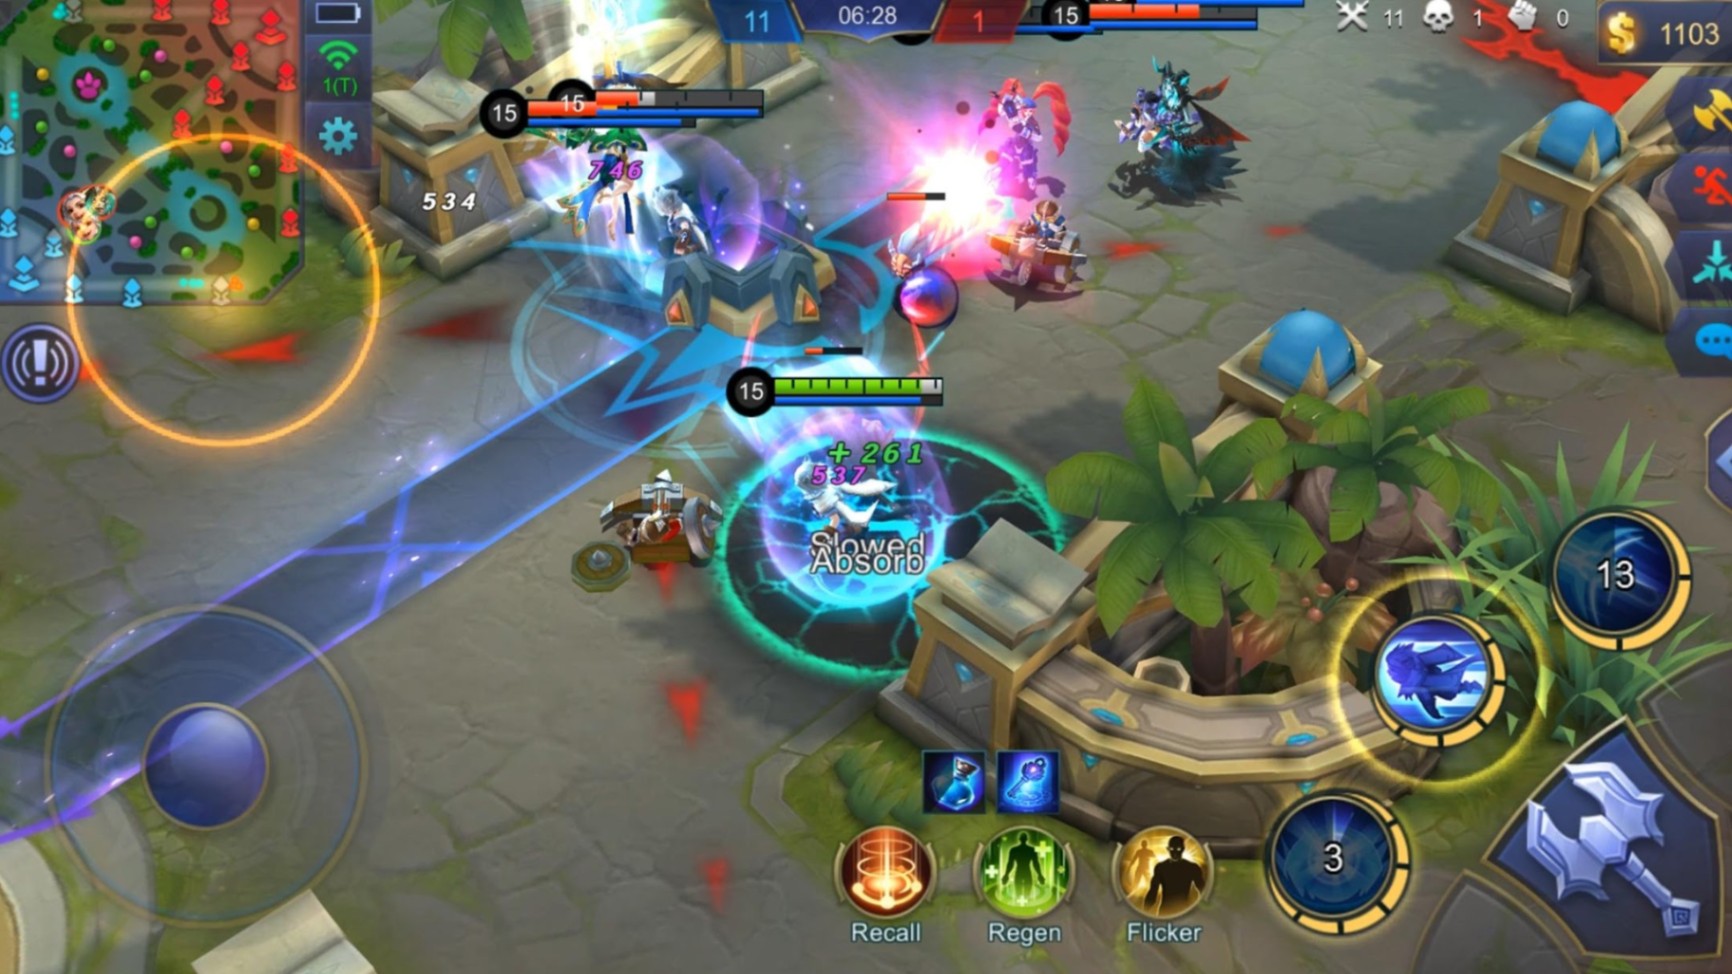 How to Get BP in Mobile Legends